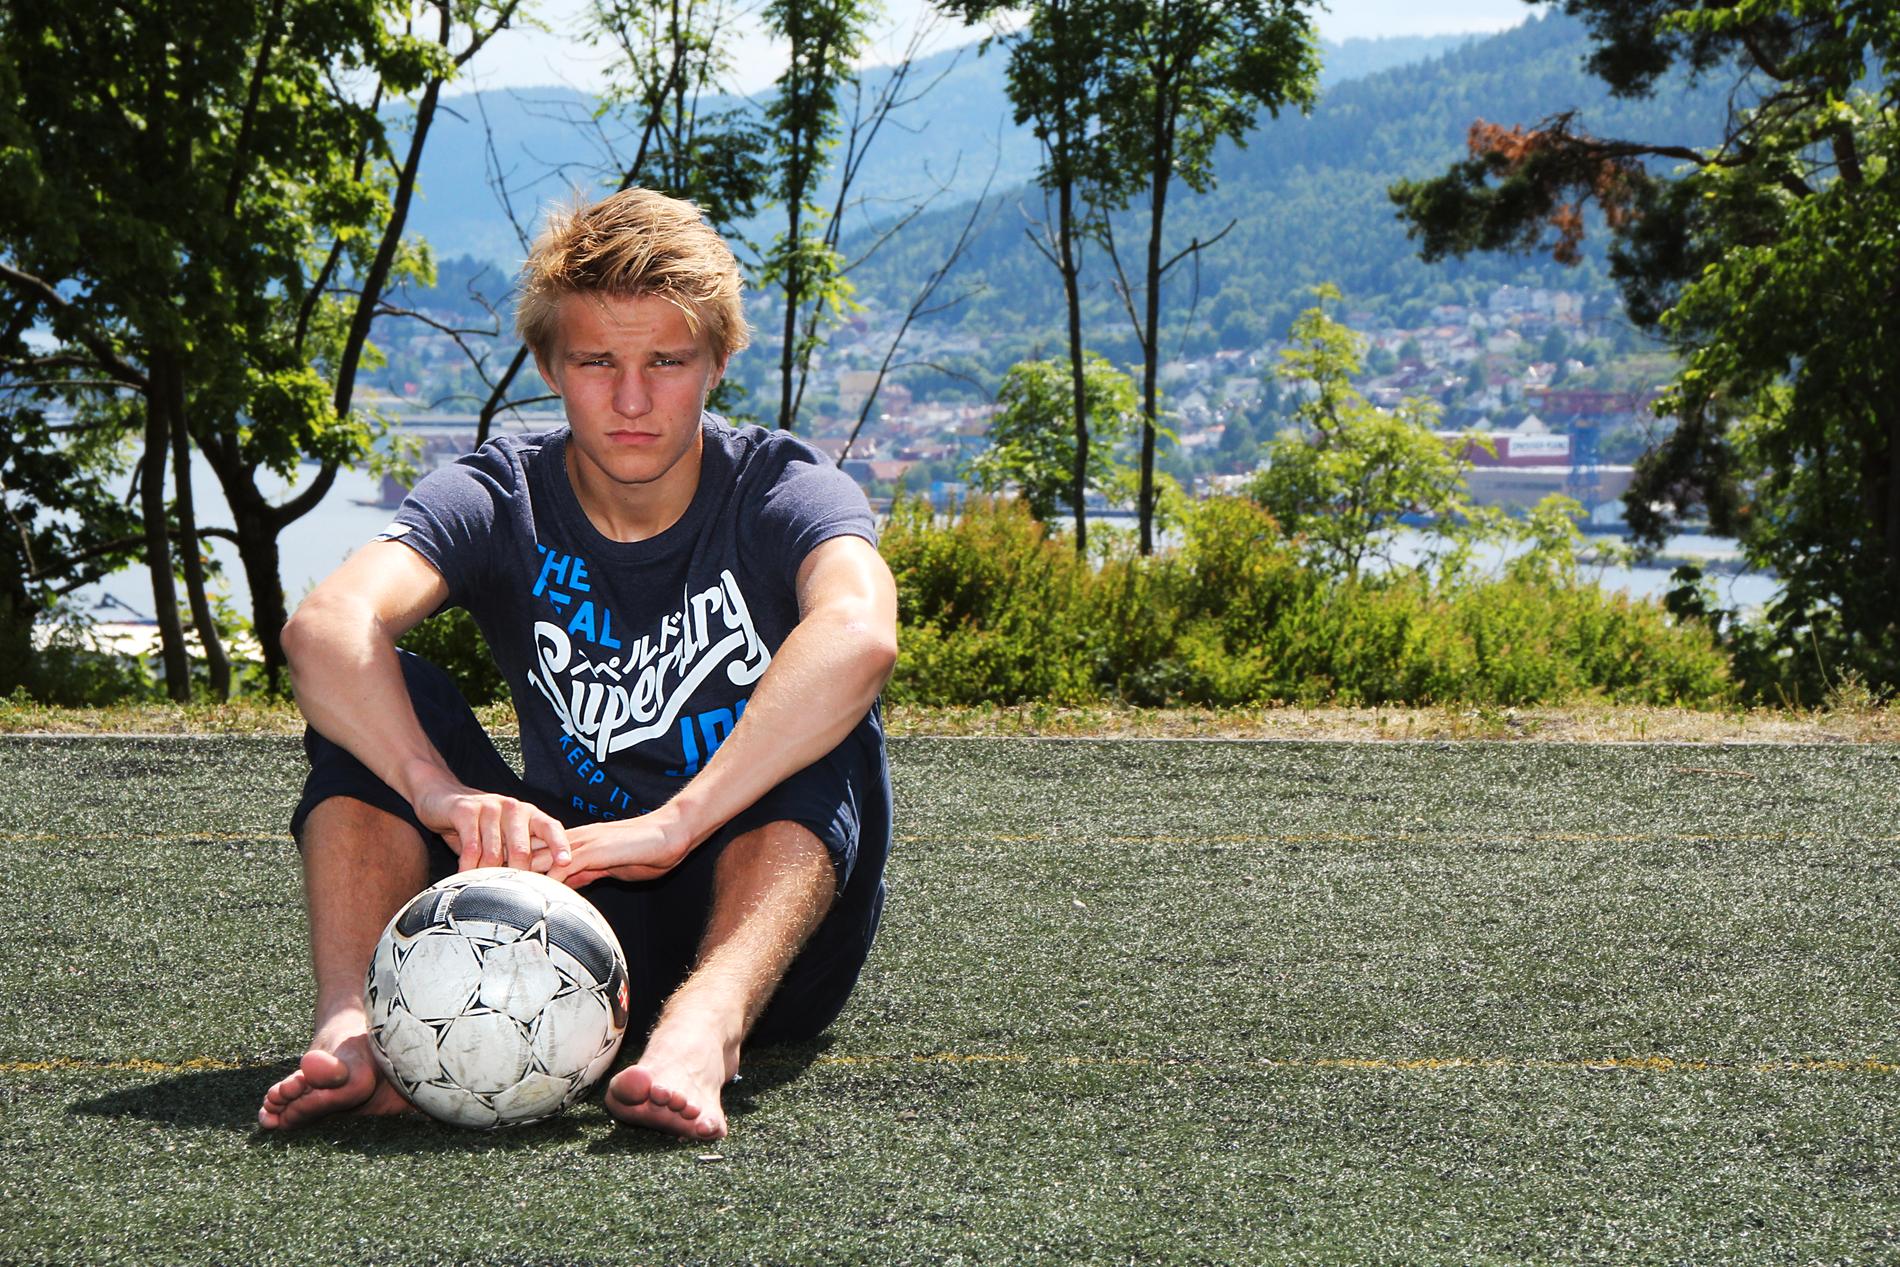 Ødegaard becomes a star on artificial turf - will play on turf - VG